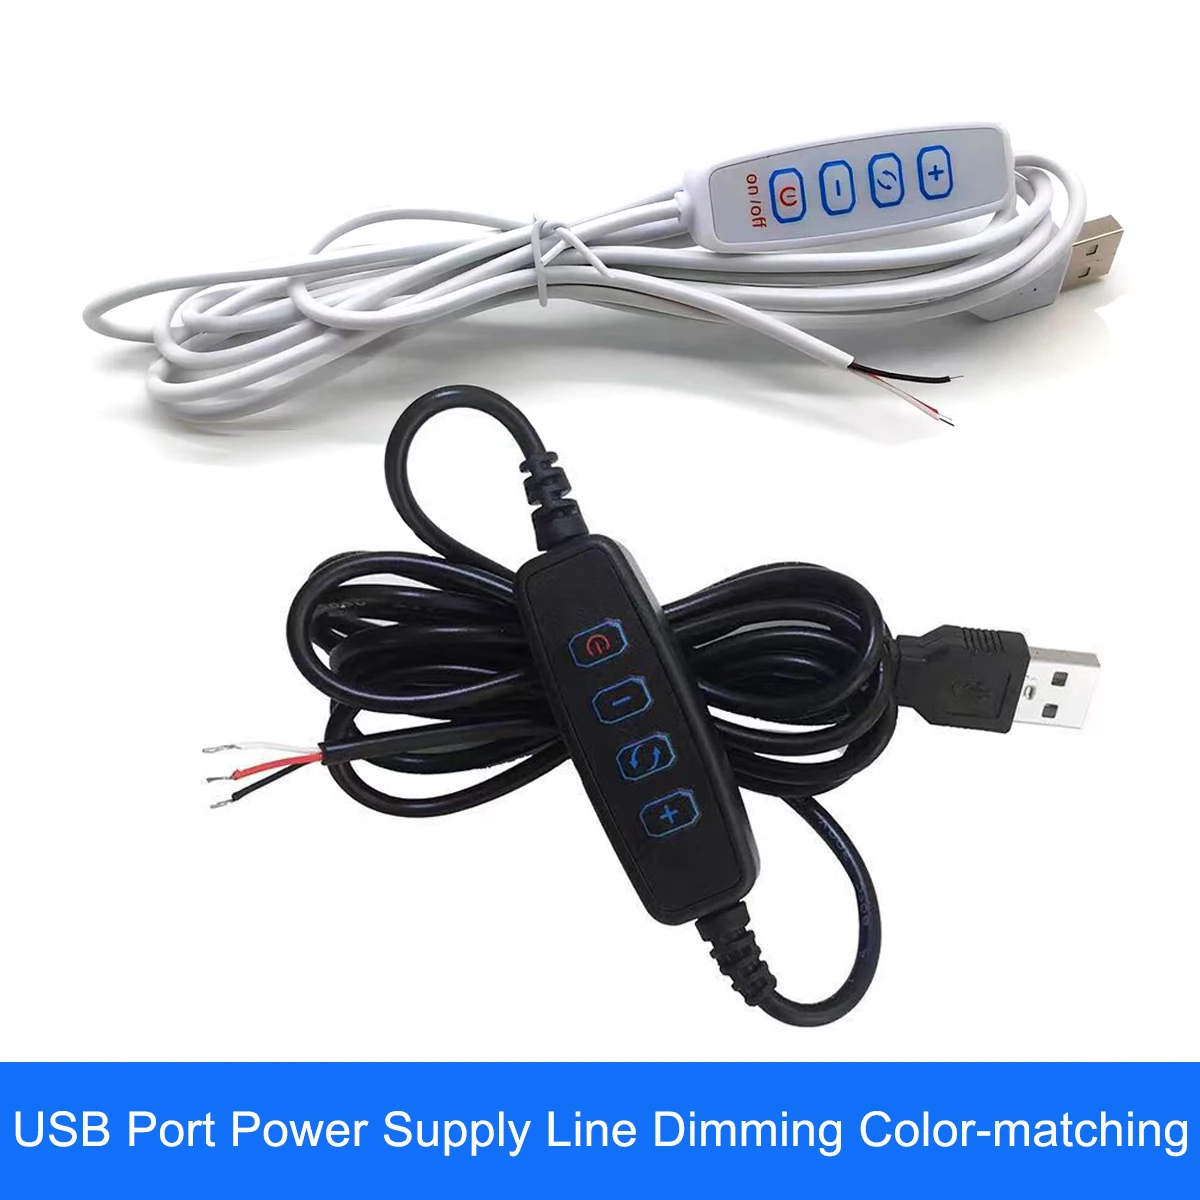 

DC 5V LED Dimmer USB Port Power Supply Line Dimming Color-matching Extension Cable With ON OFF Switch Adapter For LED Light Bulb